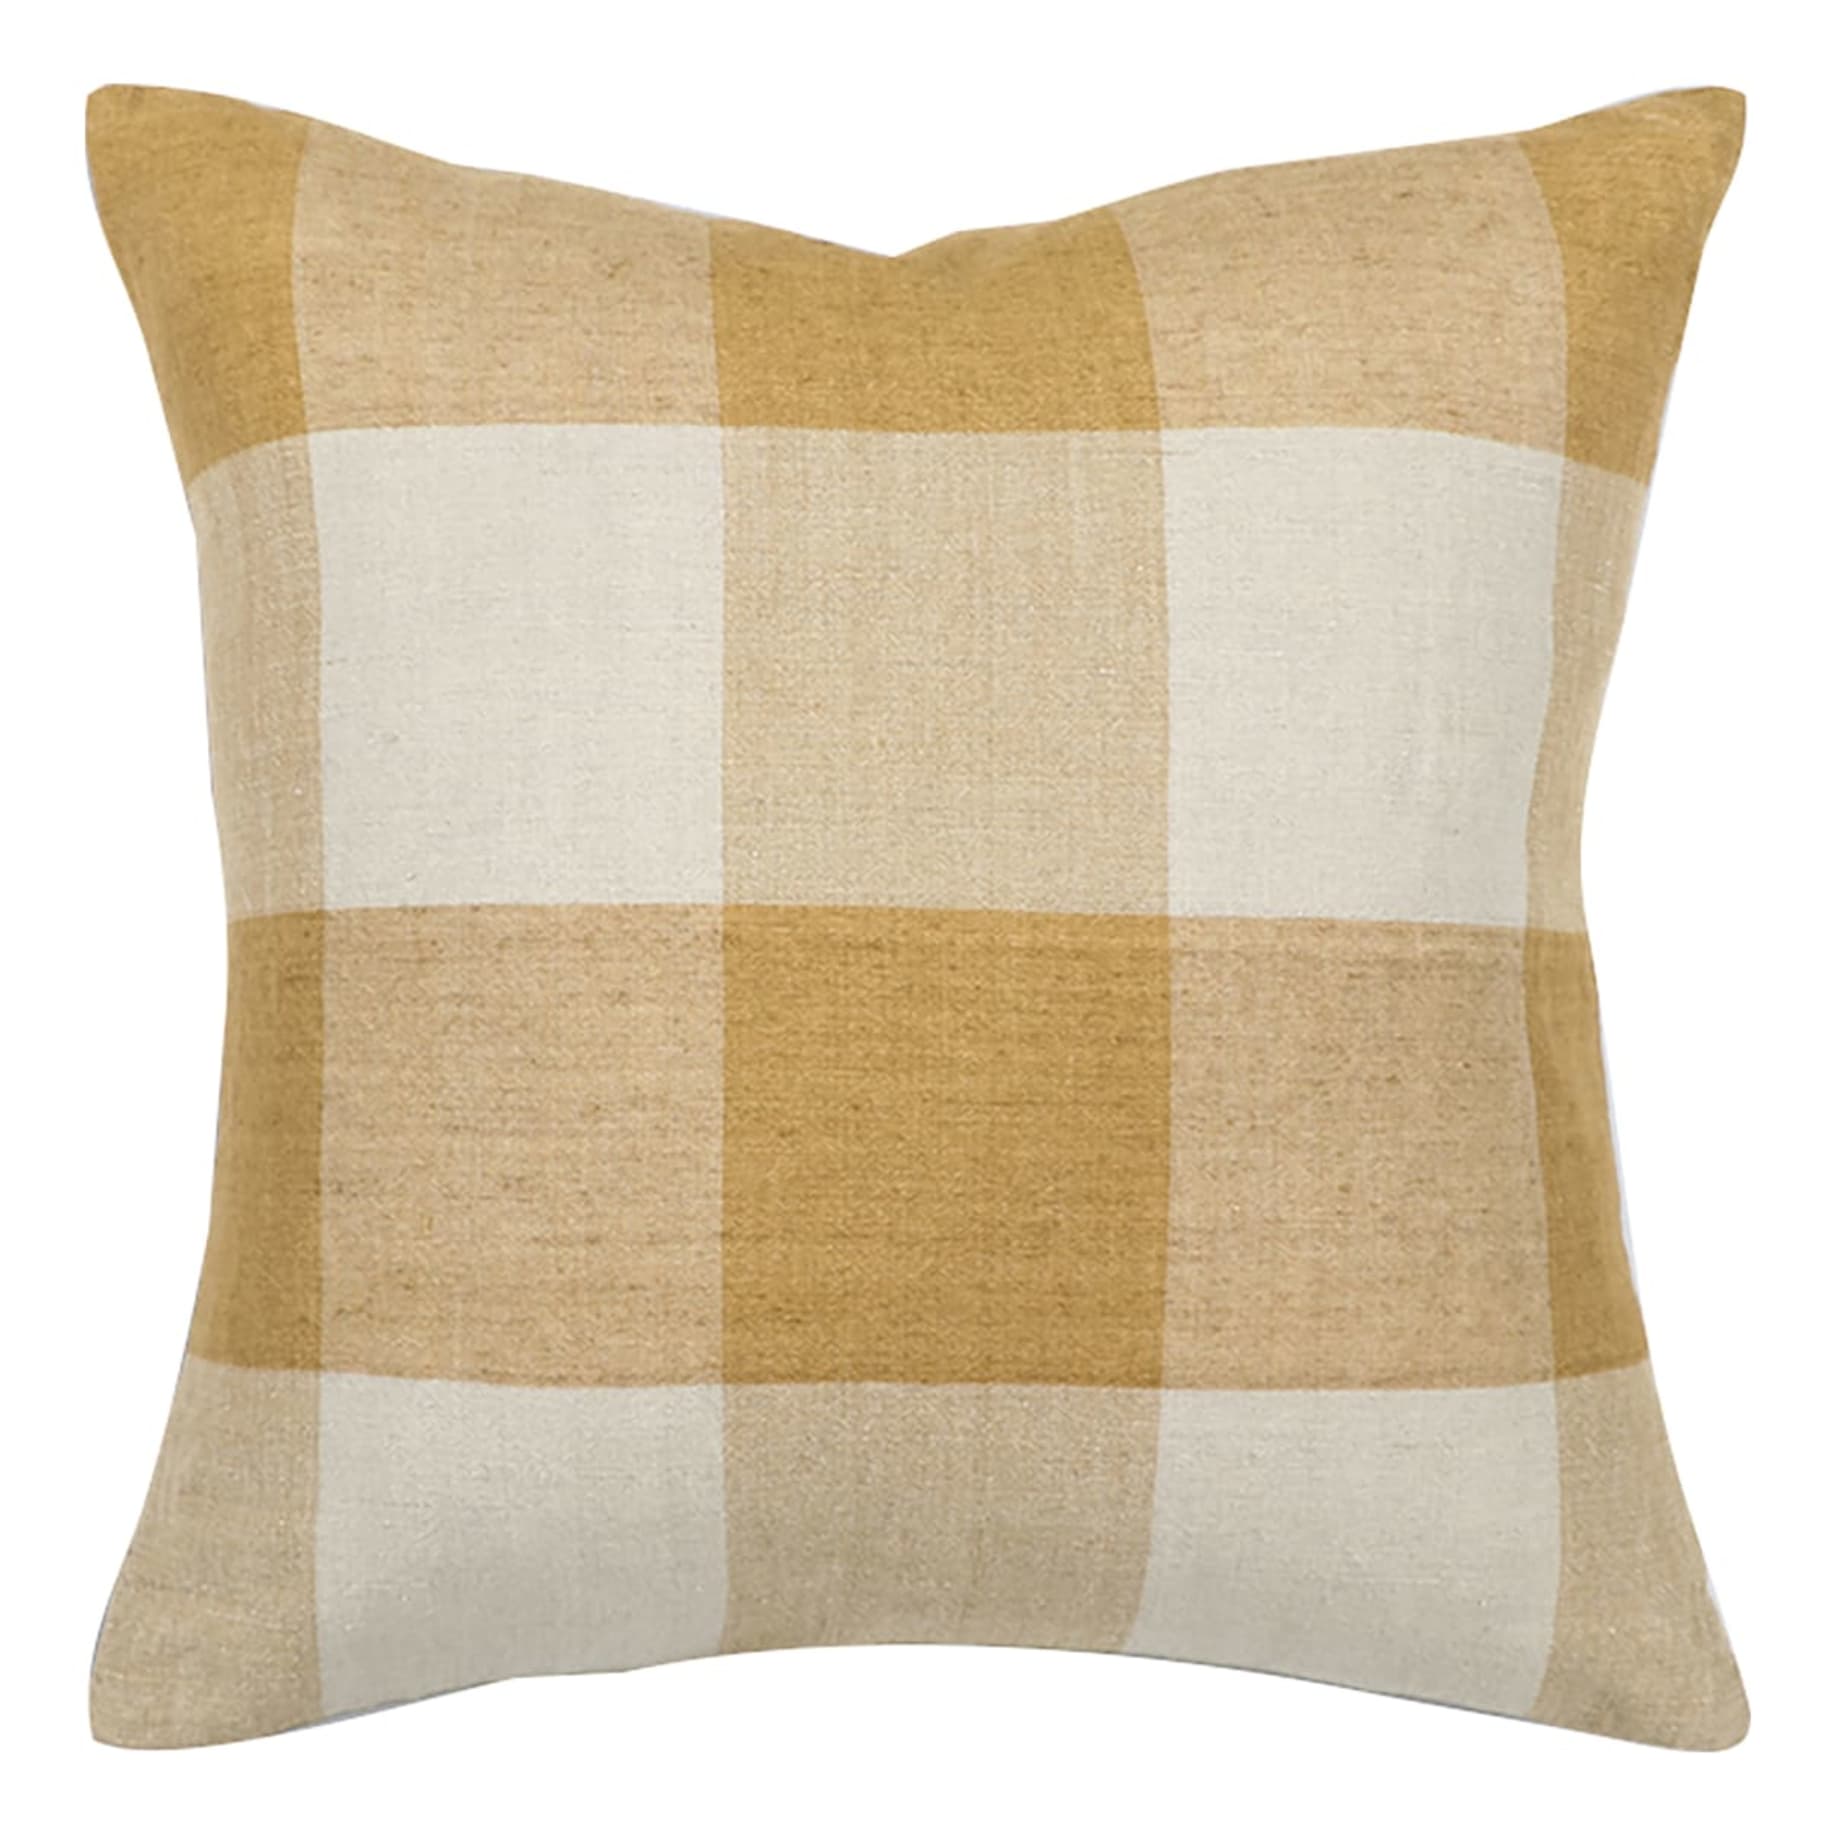 Archer Feather Fill Cushion 50x50cm in Toffee